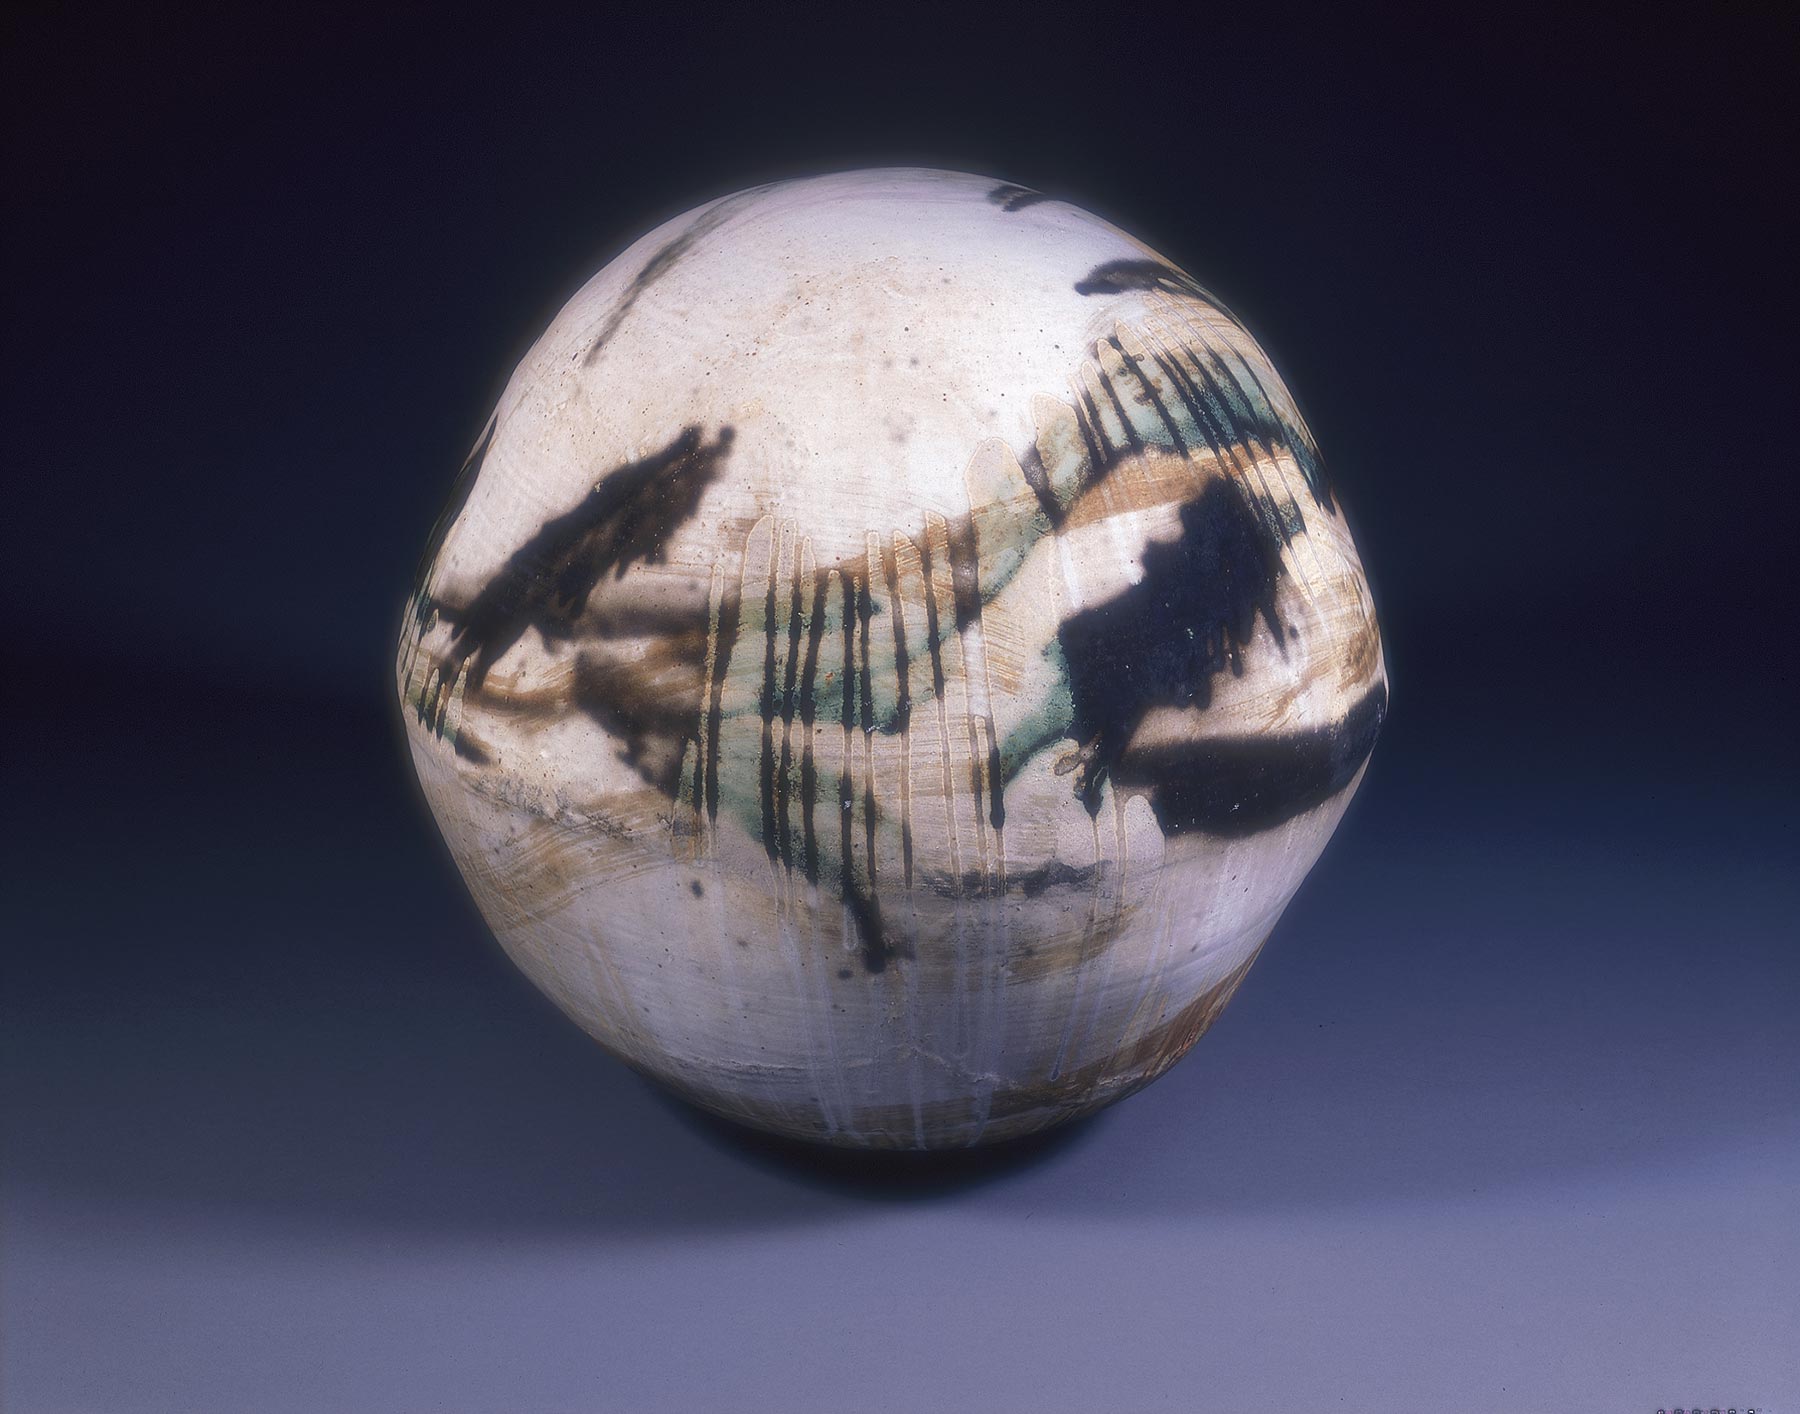 Spherical stoneware object covered in loosely applied, brushstroke-like black, brown, and green glazes.